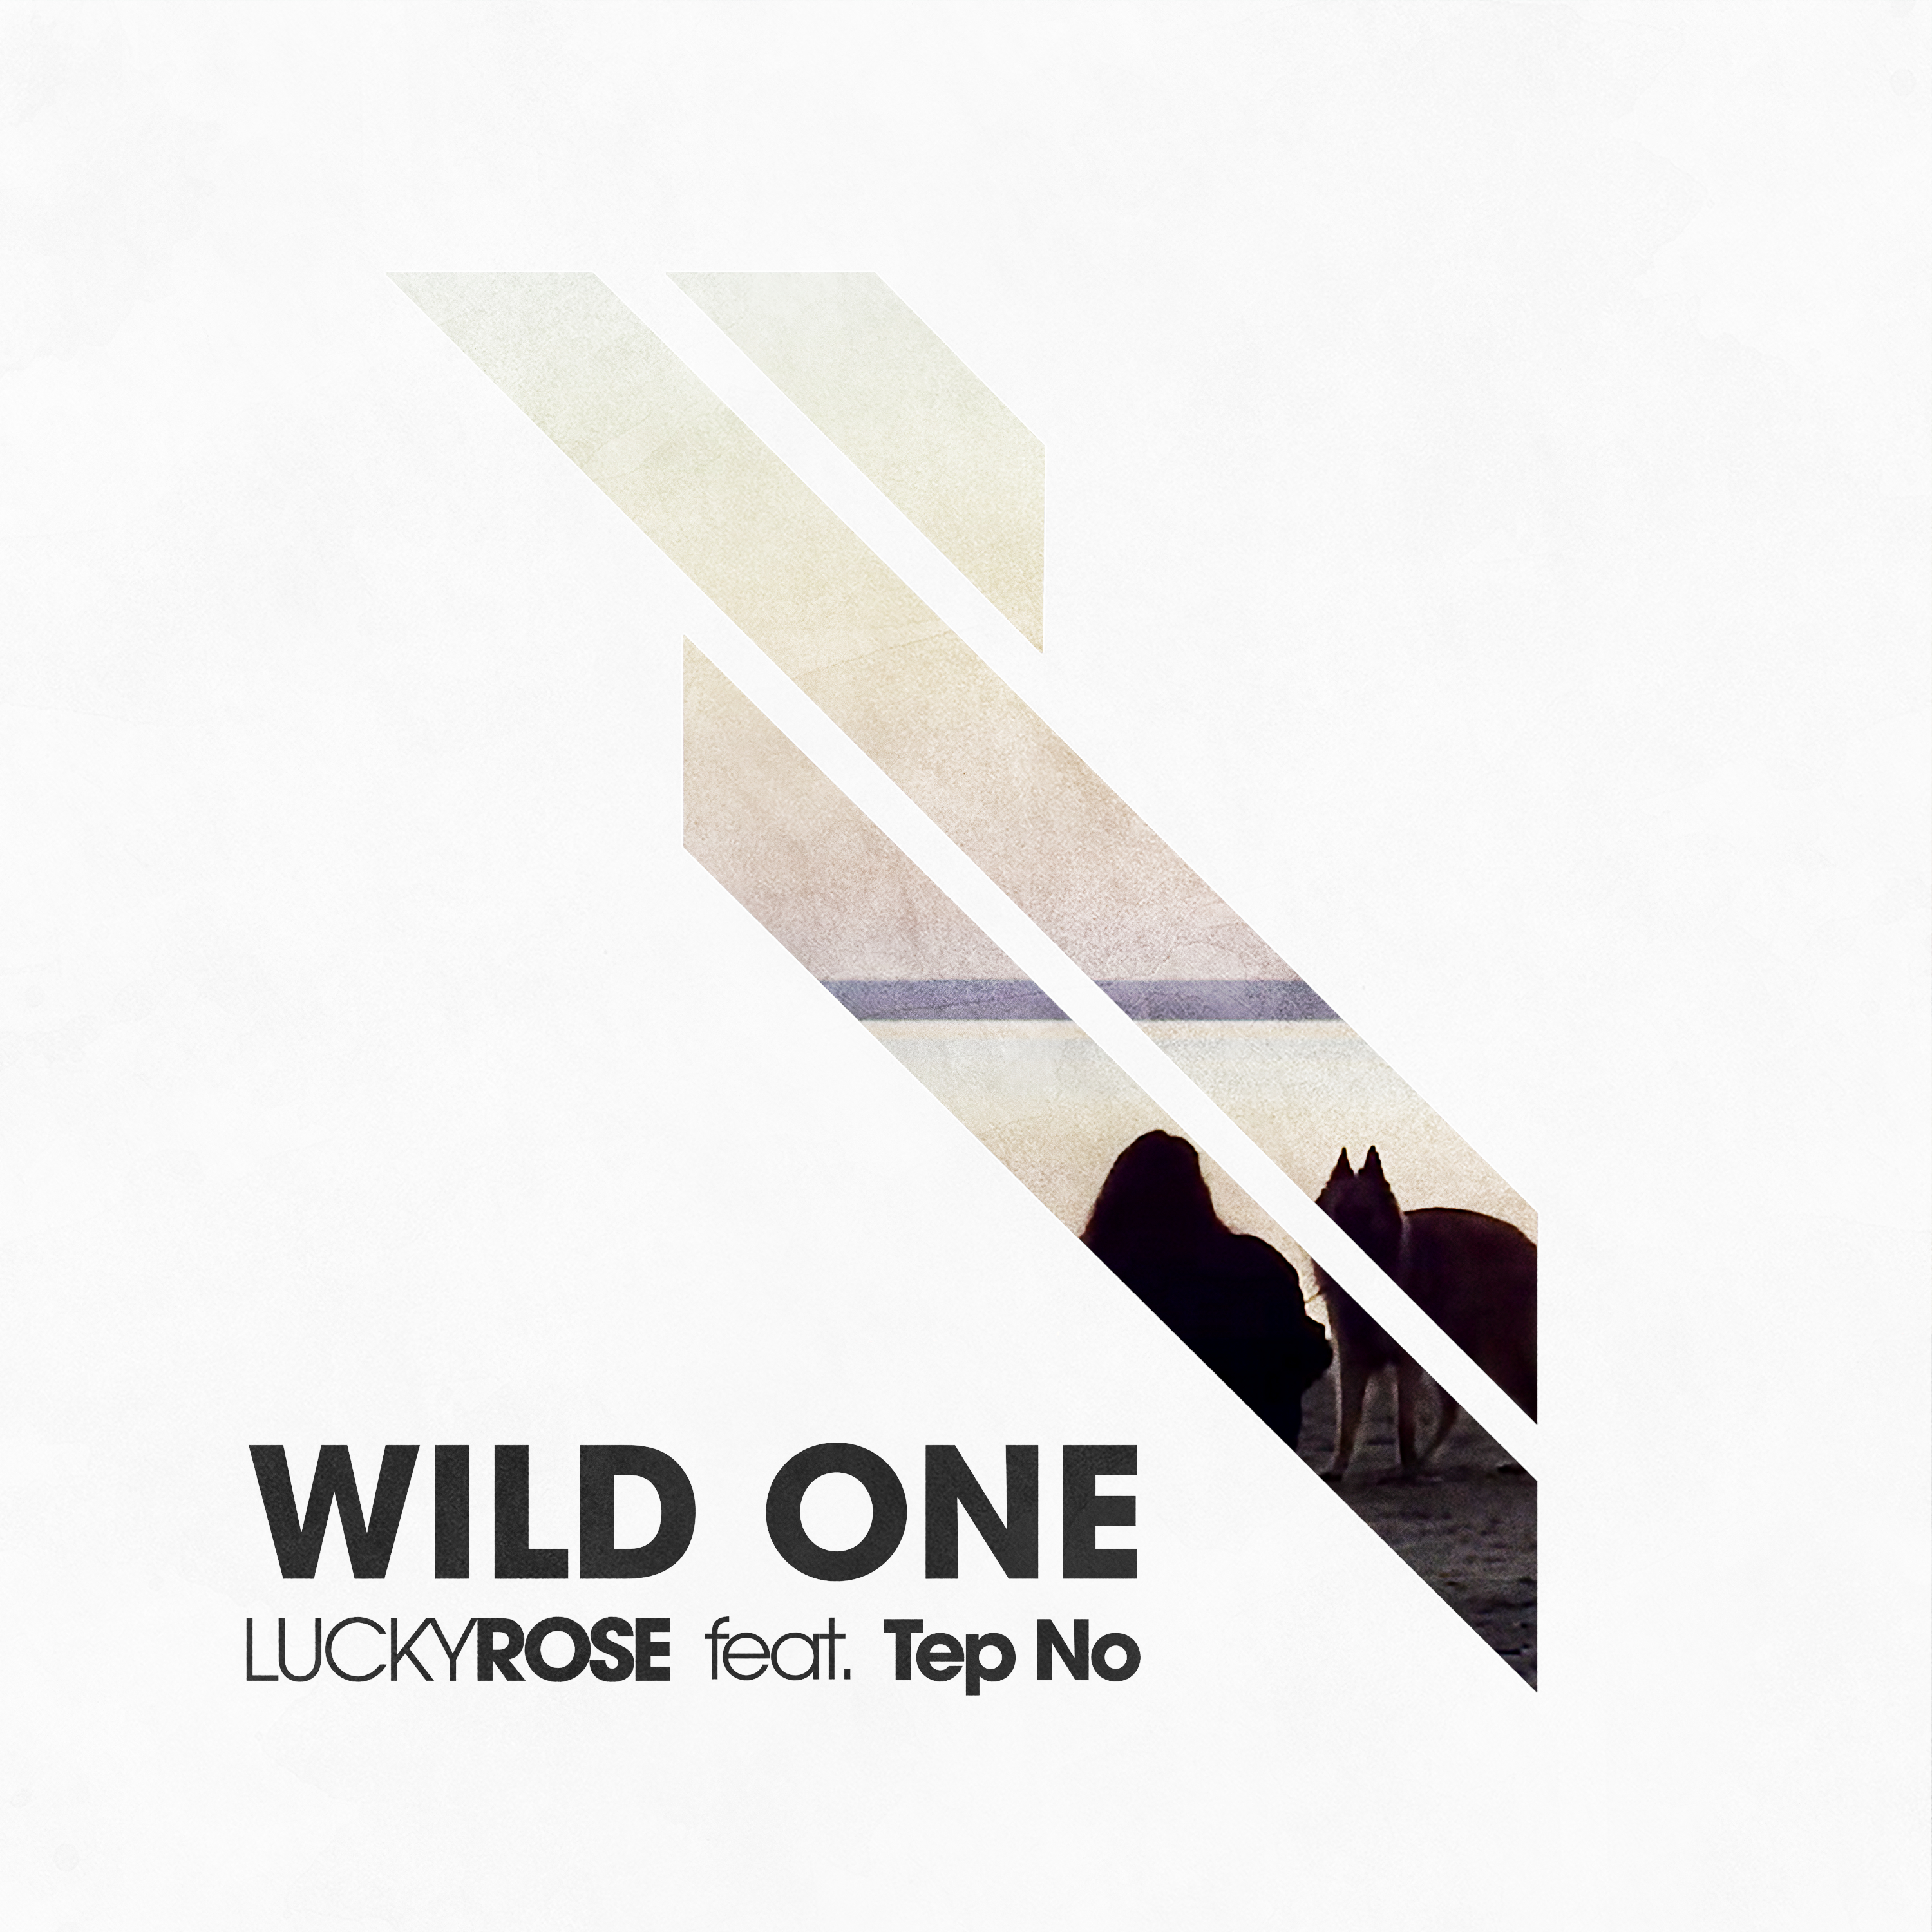 Lucky Rose Hits The Spot With “Wild One feat. Tep No” Summer-Feeling Single